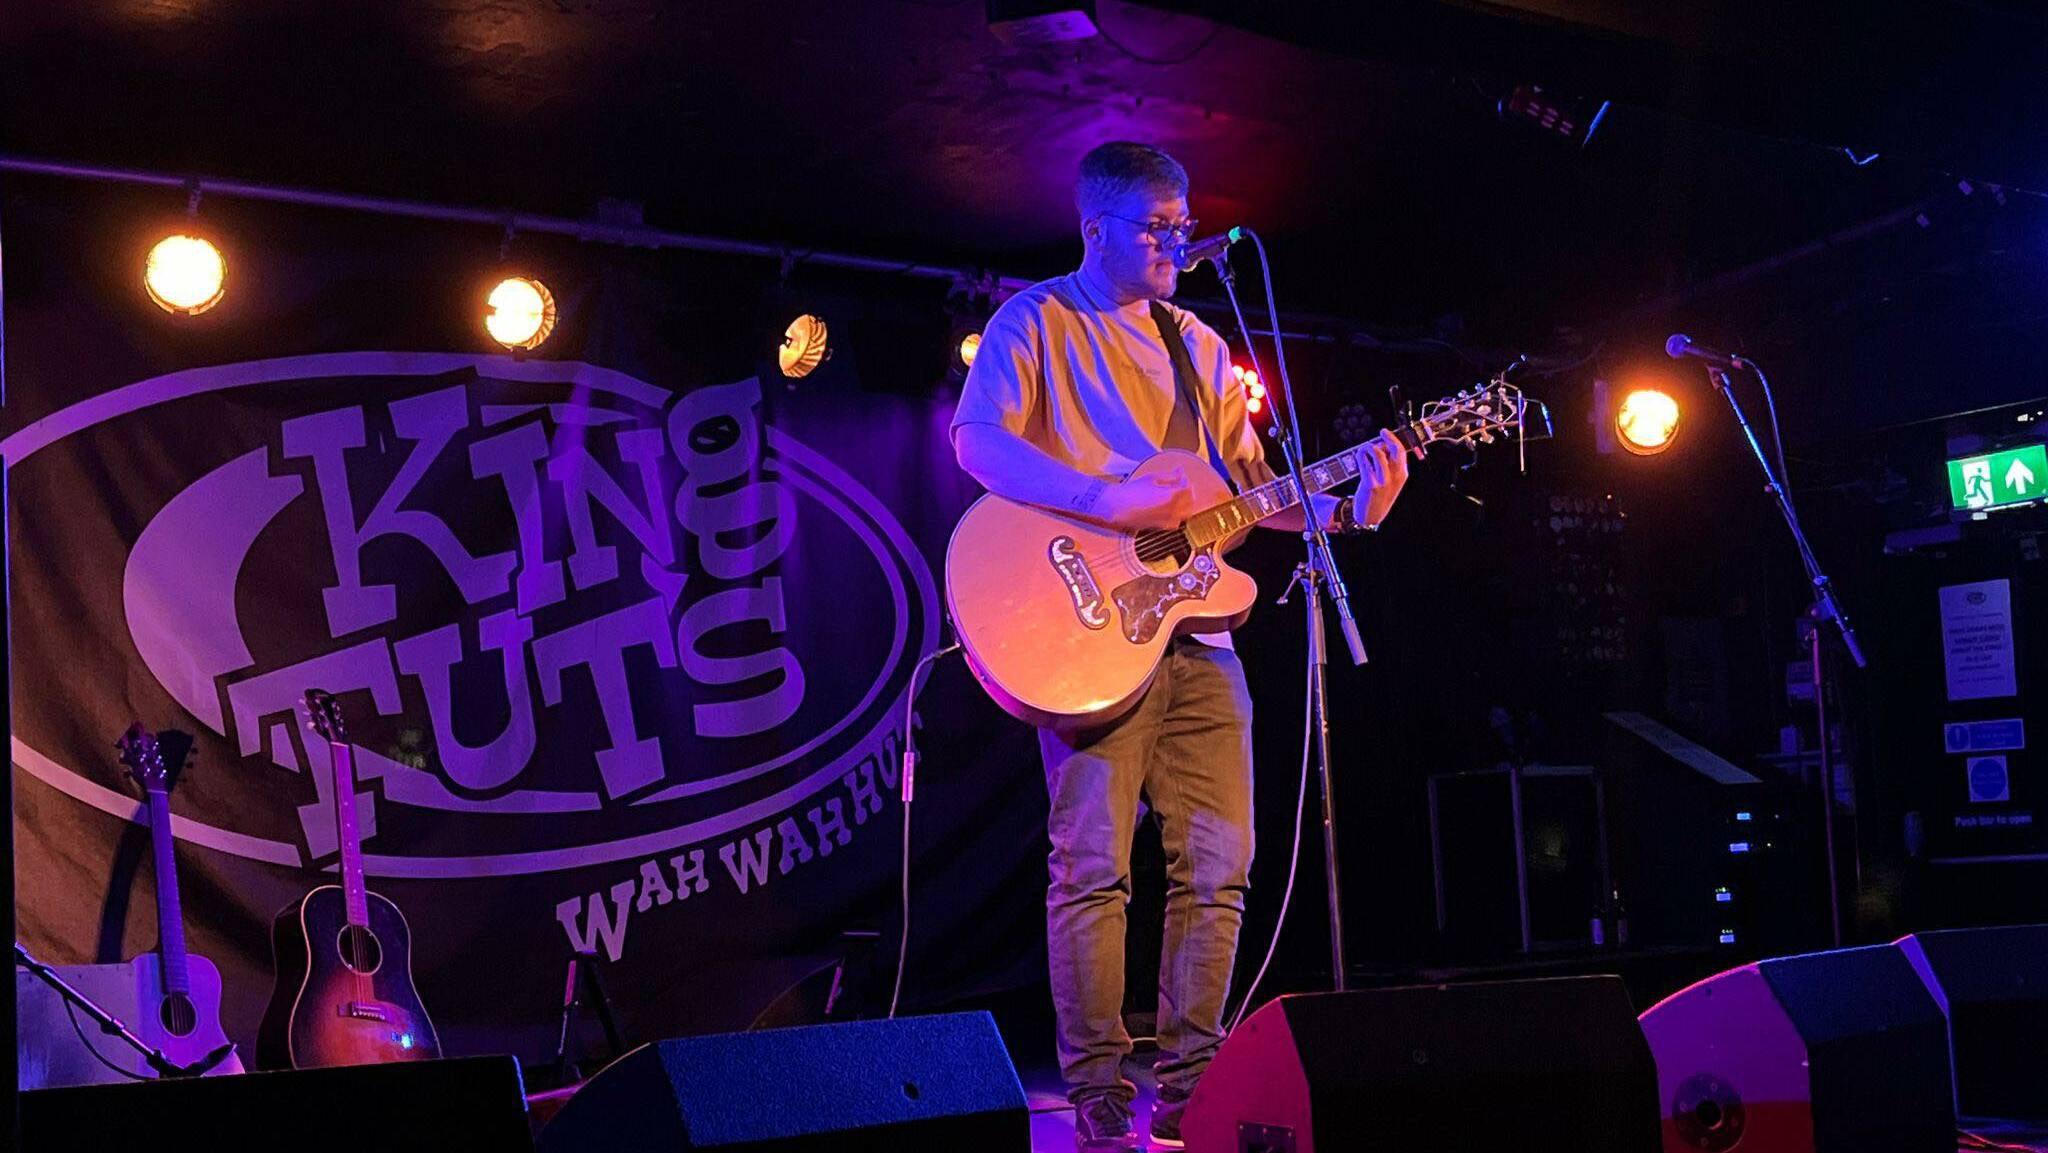 Thomas Rock, performing an evening of free, live music at The Ship Inn, Elie